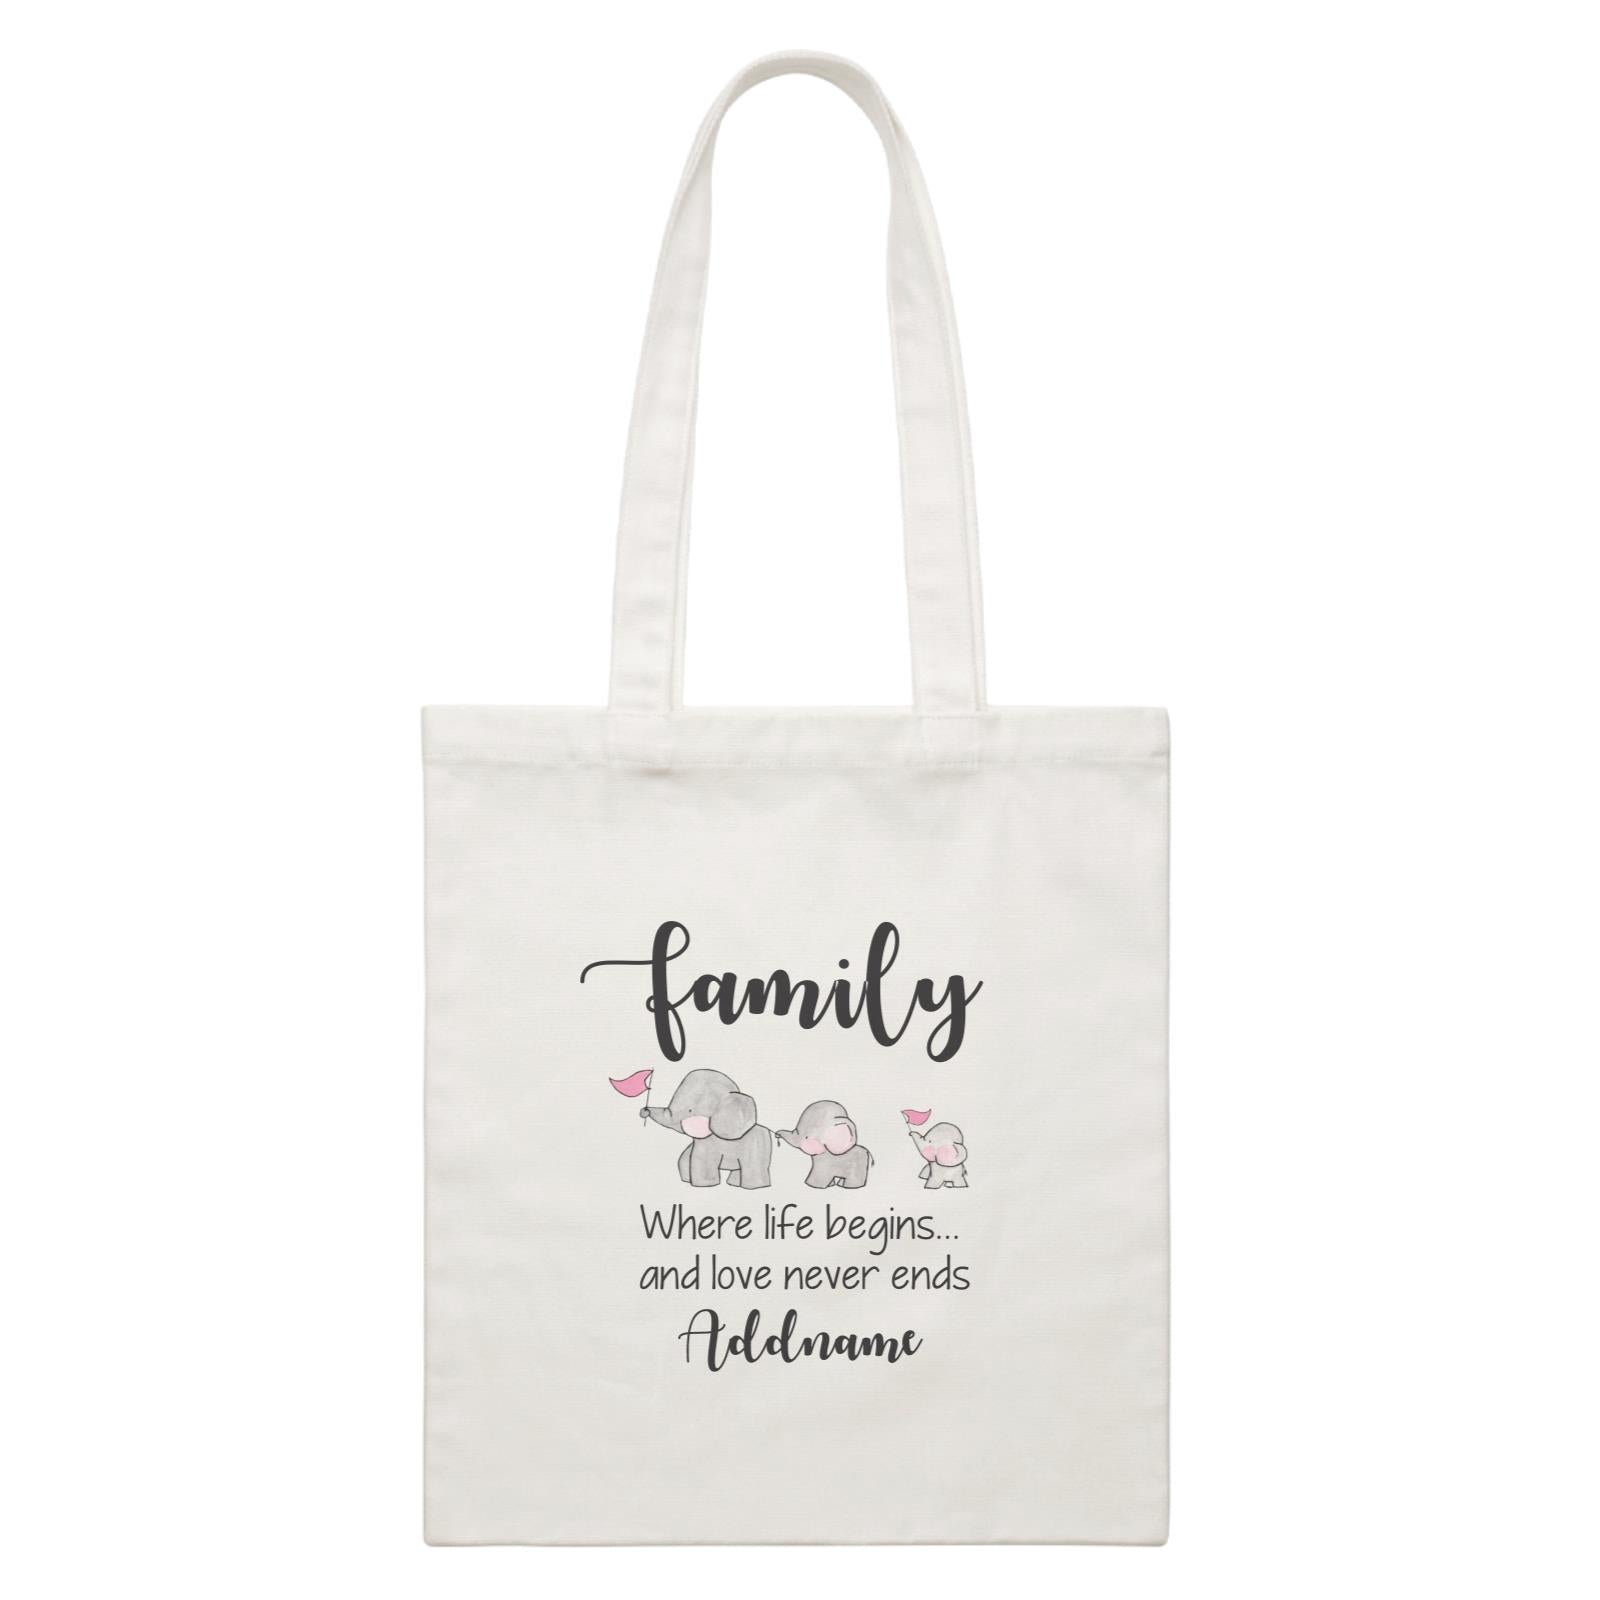 Family Is Everythings Quotes Family Where Life Begins And Love Never Ends Addname White Canvas Bag